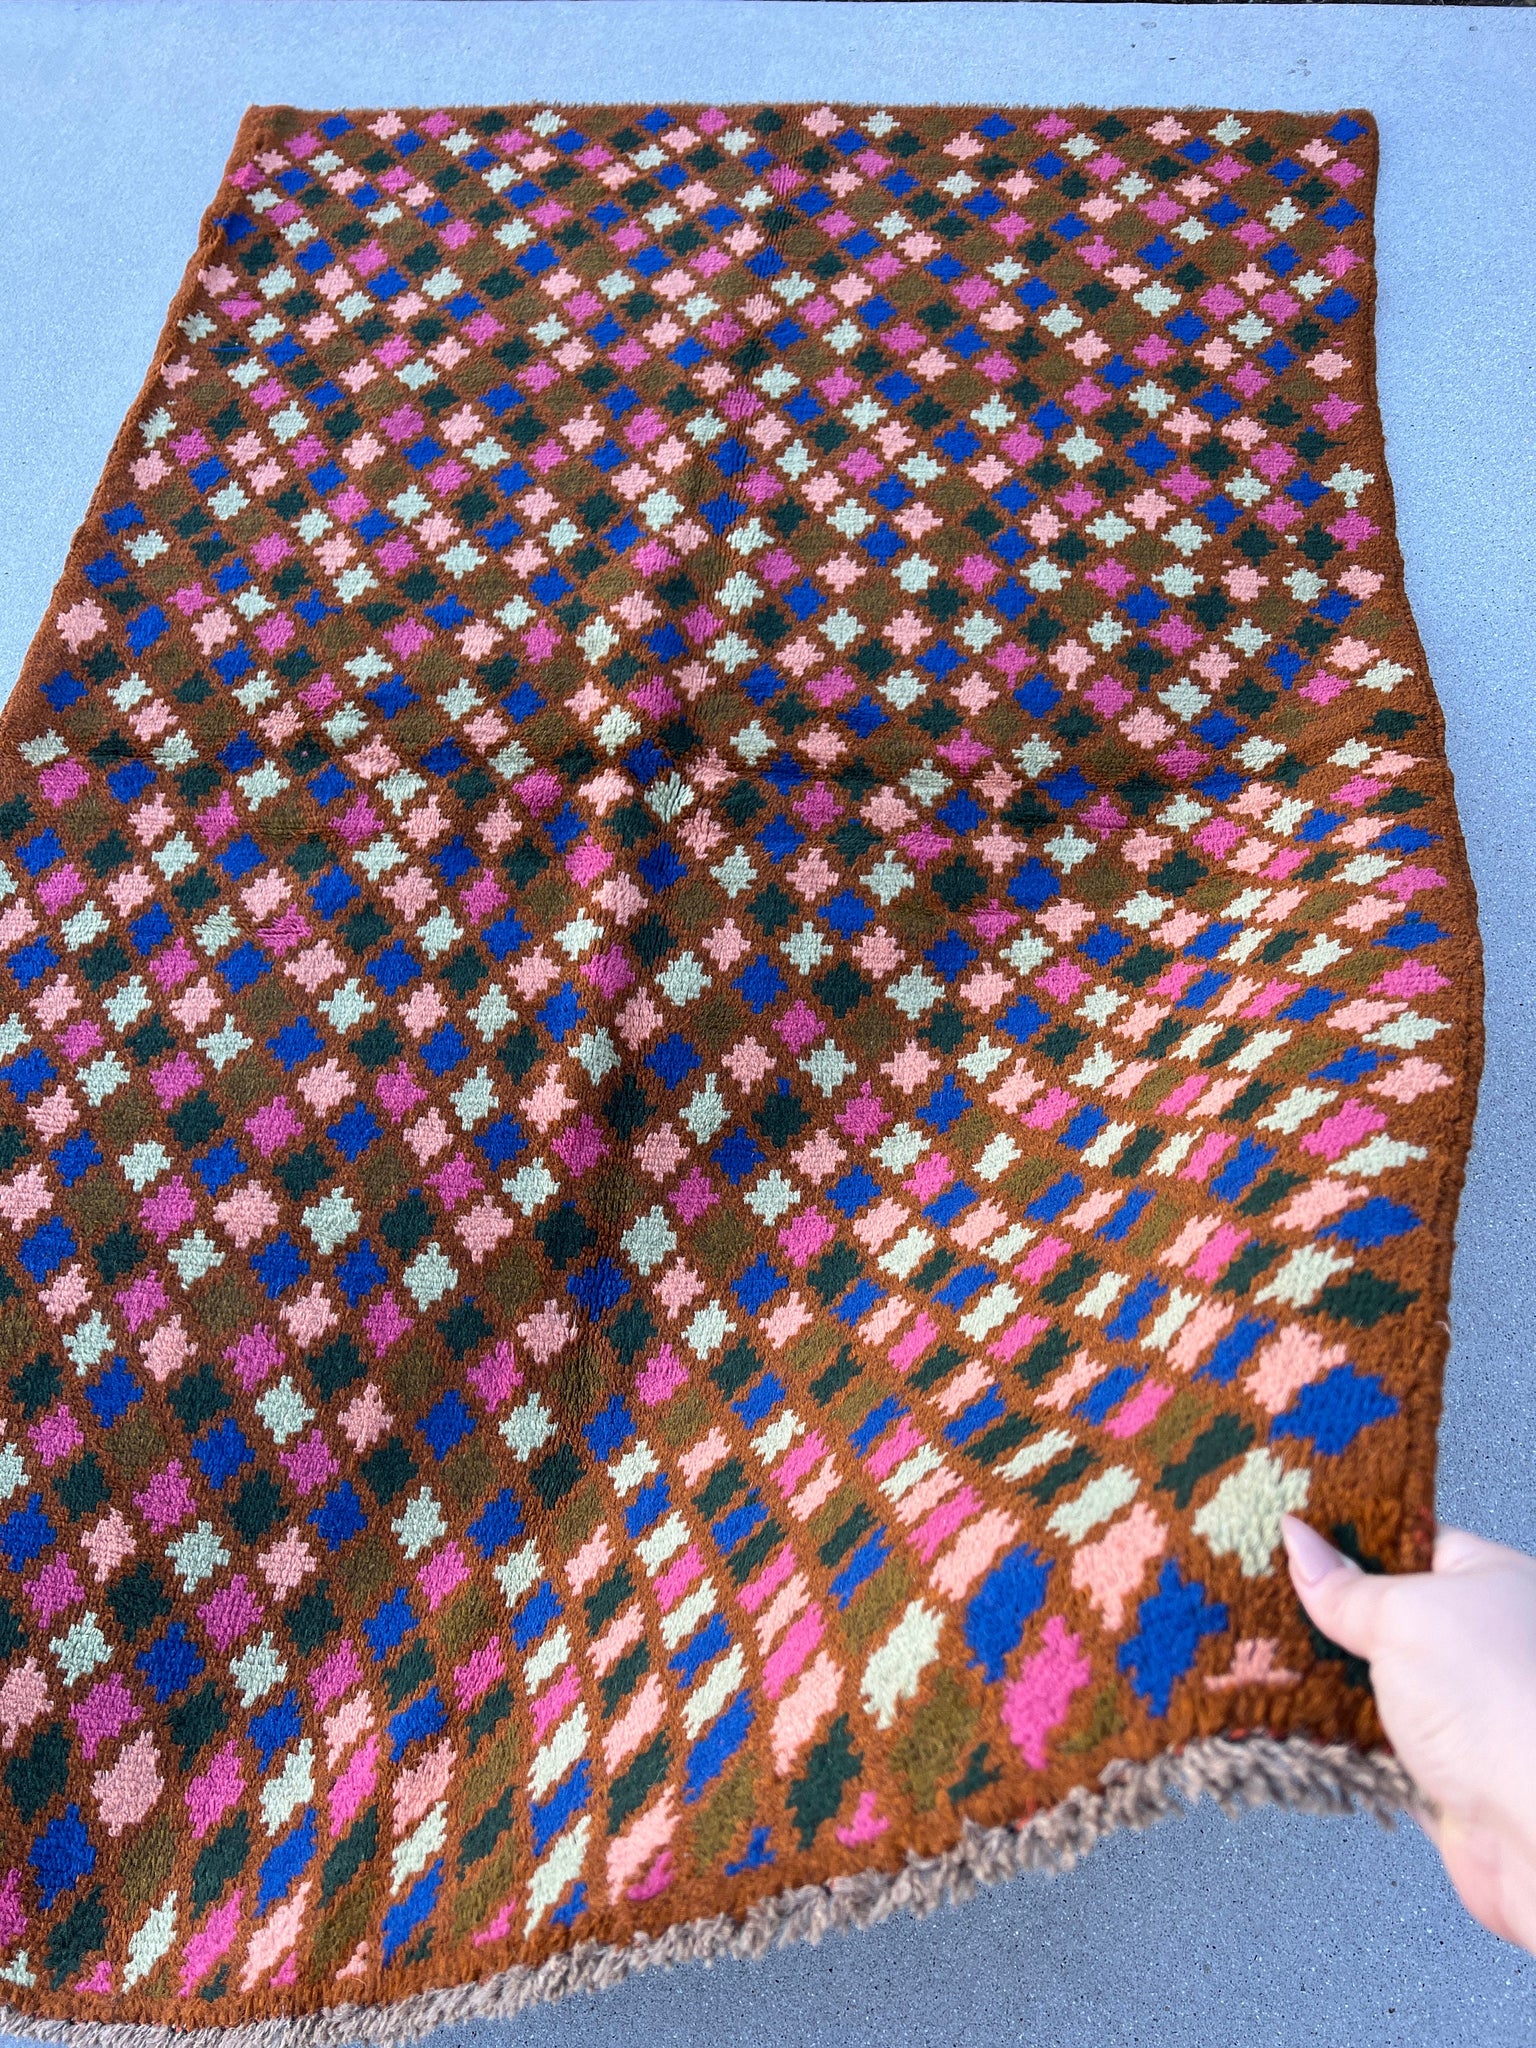 4x6 (120x185) Handmade Vintage Baluch Afghan Rug | Copper Brown Turquoise Black Chocolate Rose Blush Pink | Geometric Hand Knotted Wool